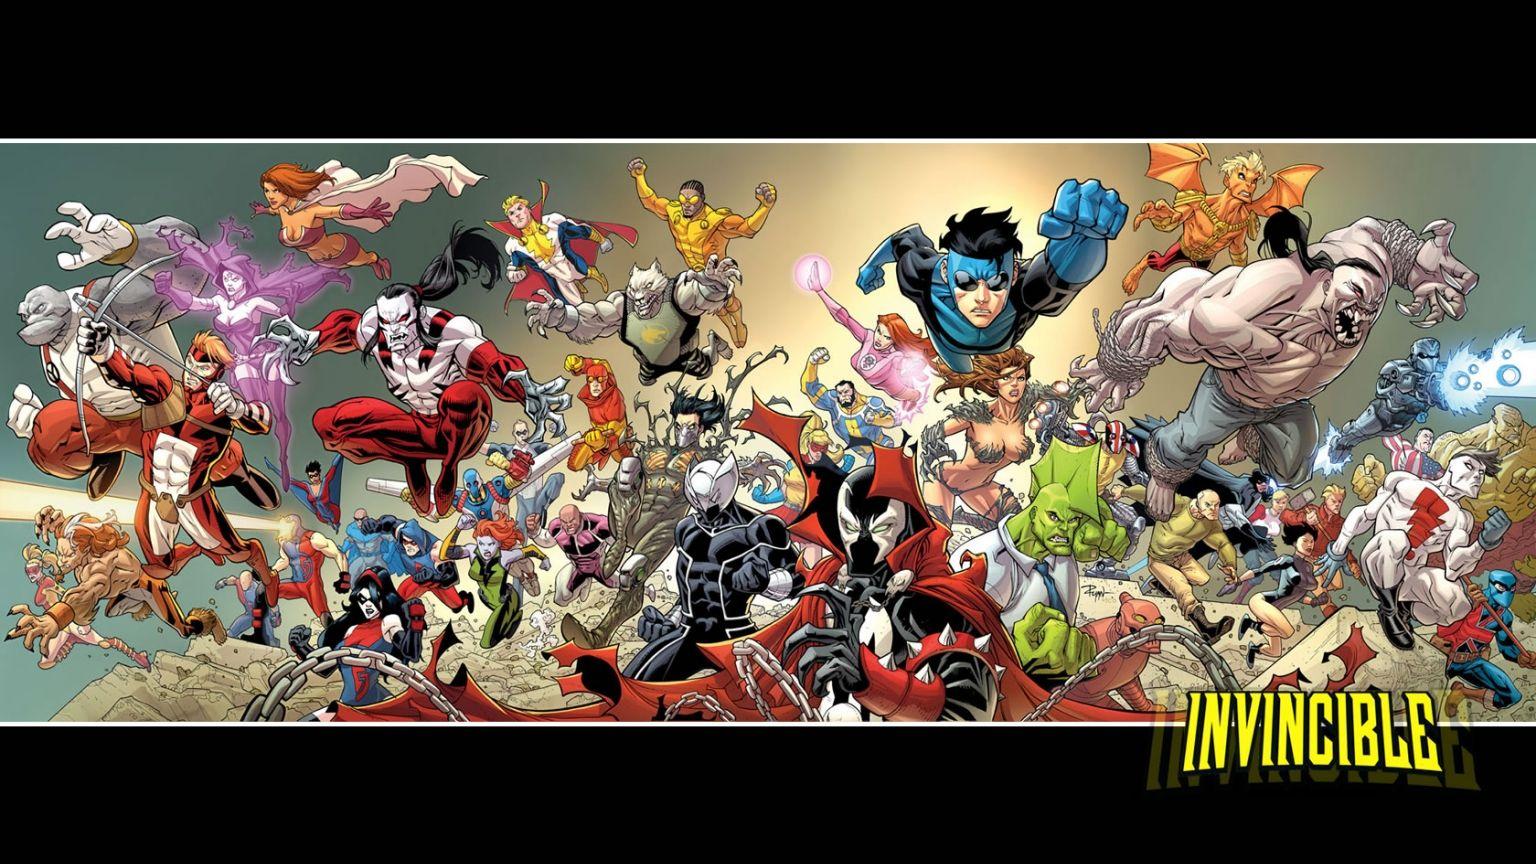 The Invincible Wallpaper HD by DGLProductions on DeviantArt